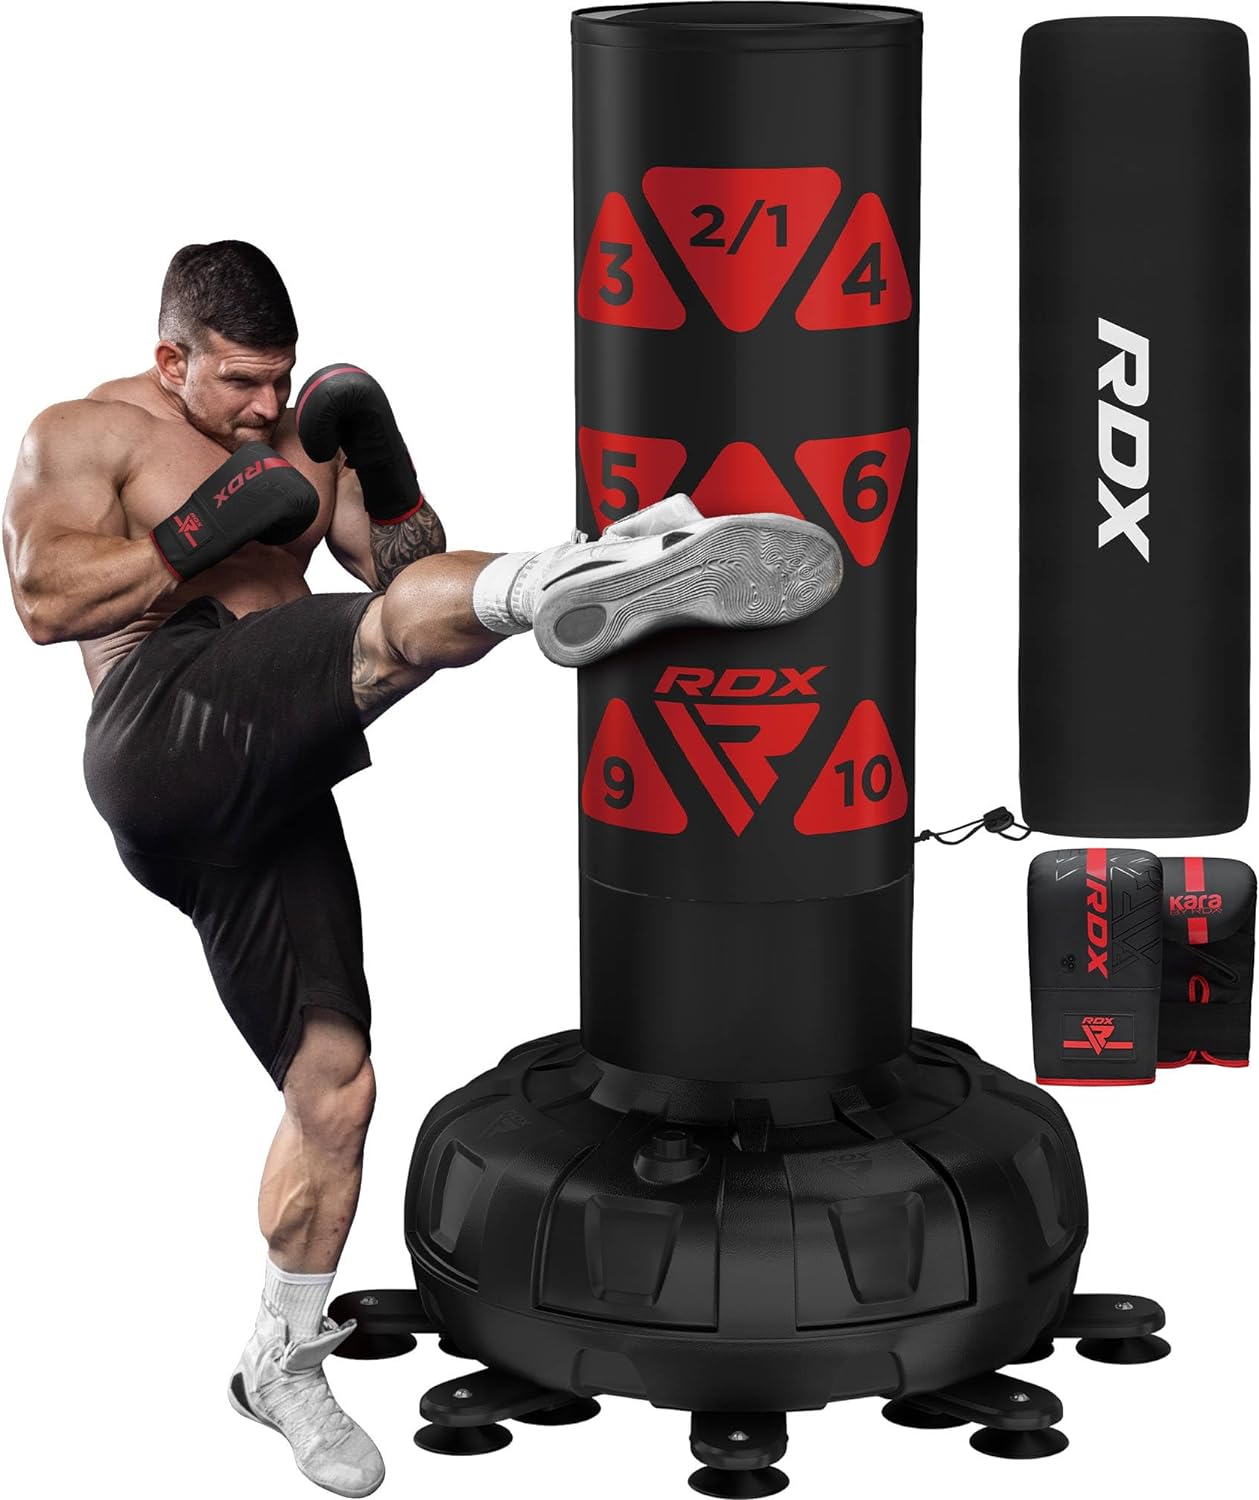 RDX XXL 330LBS Target Freestanding Punching Bag with Cover...